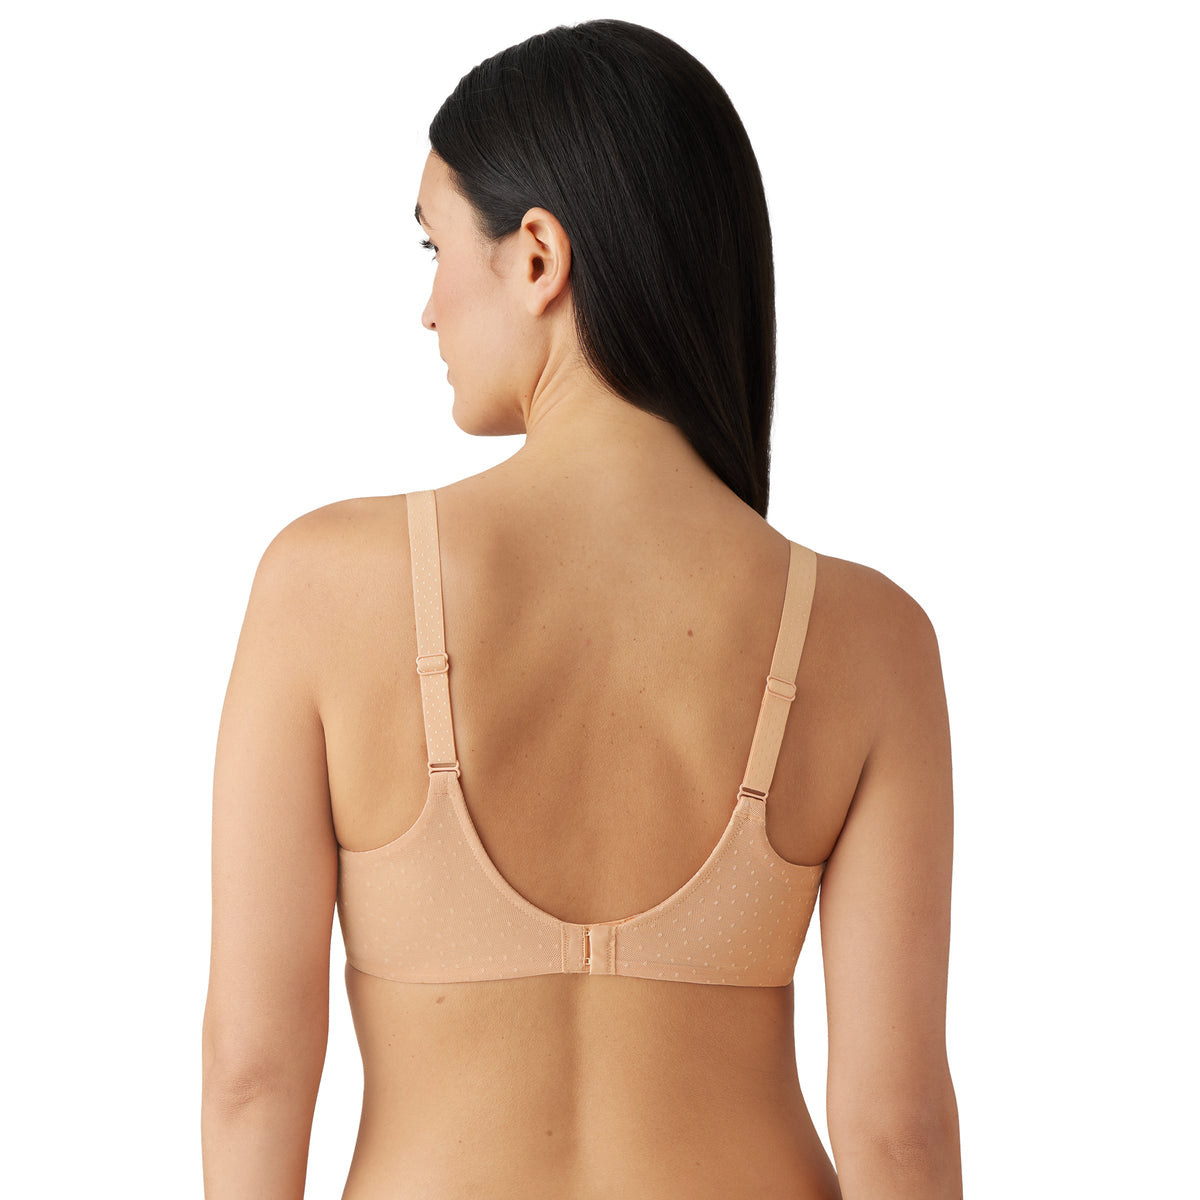 Back appeal Sale – The Pencil Test